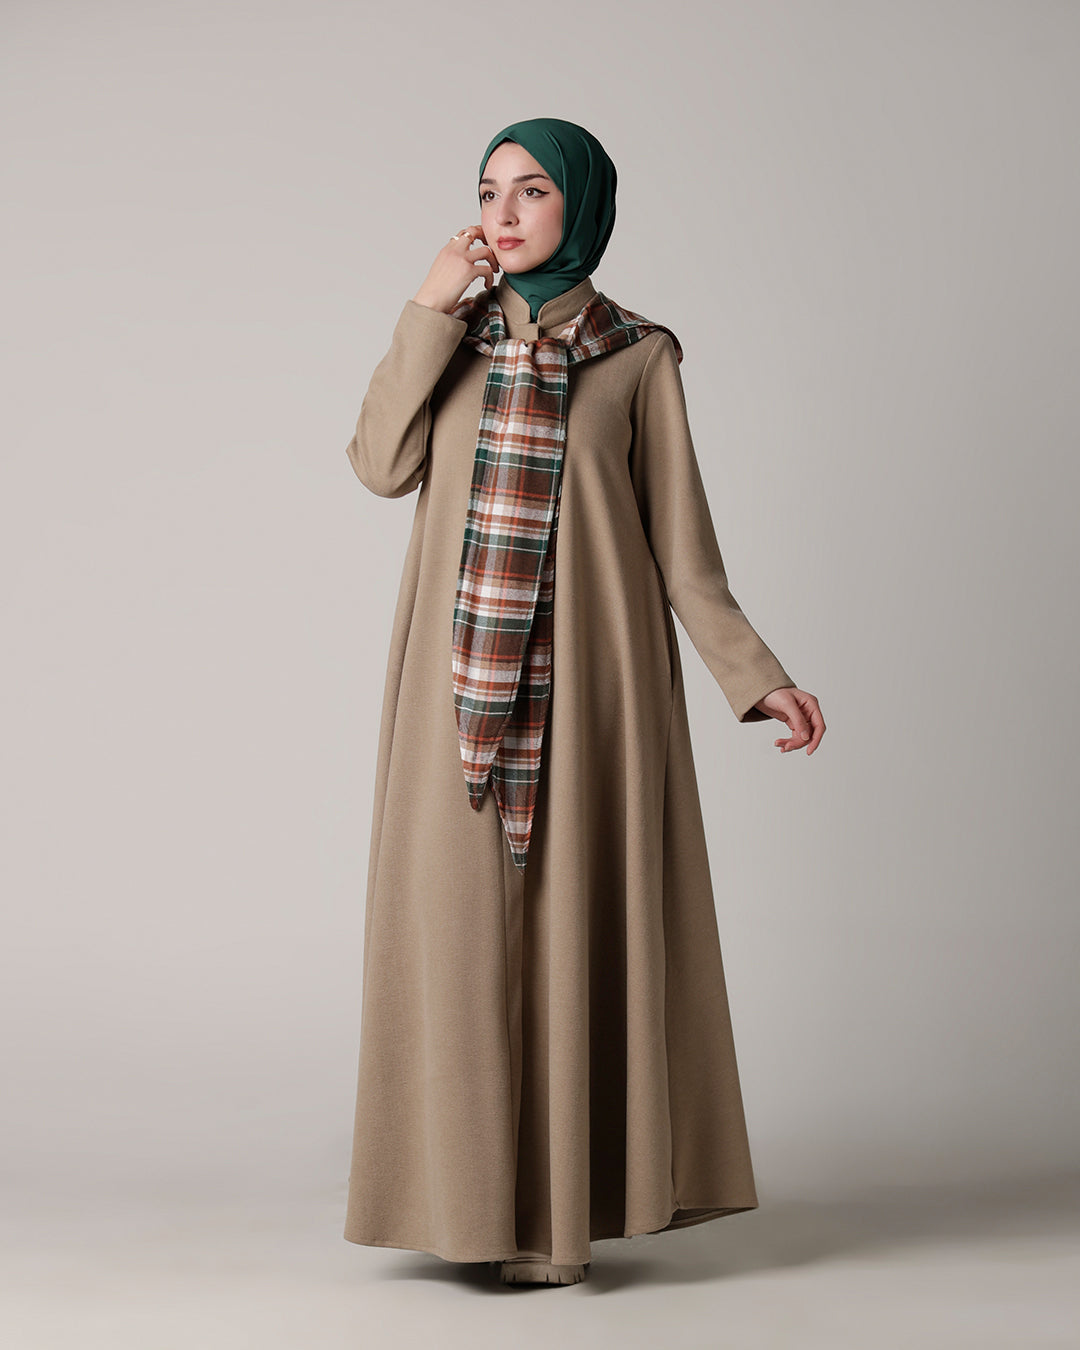 Discover Our Latest Jilbab Styles